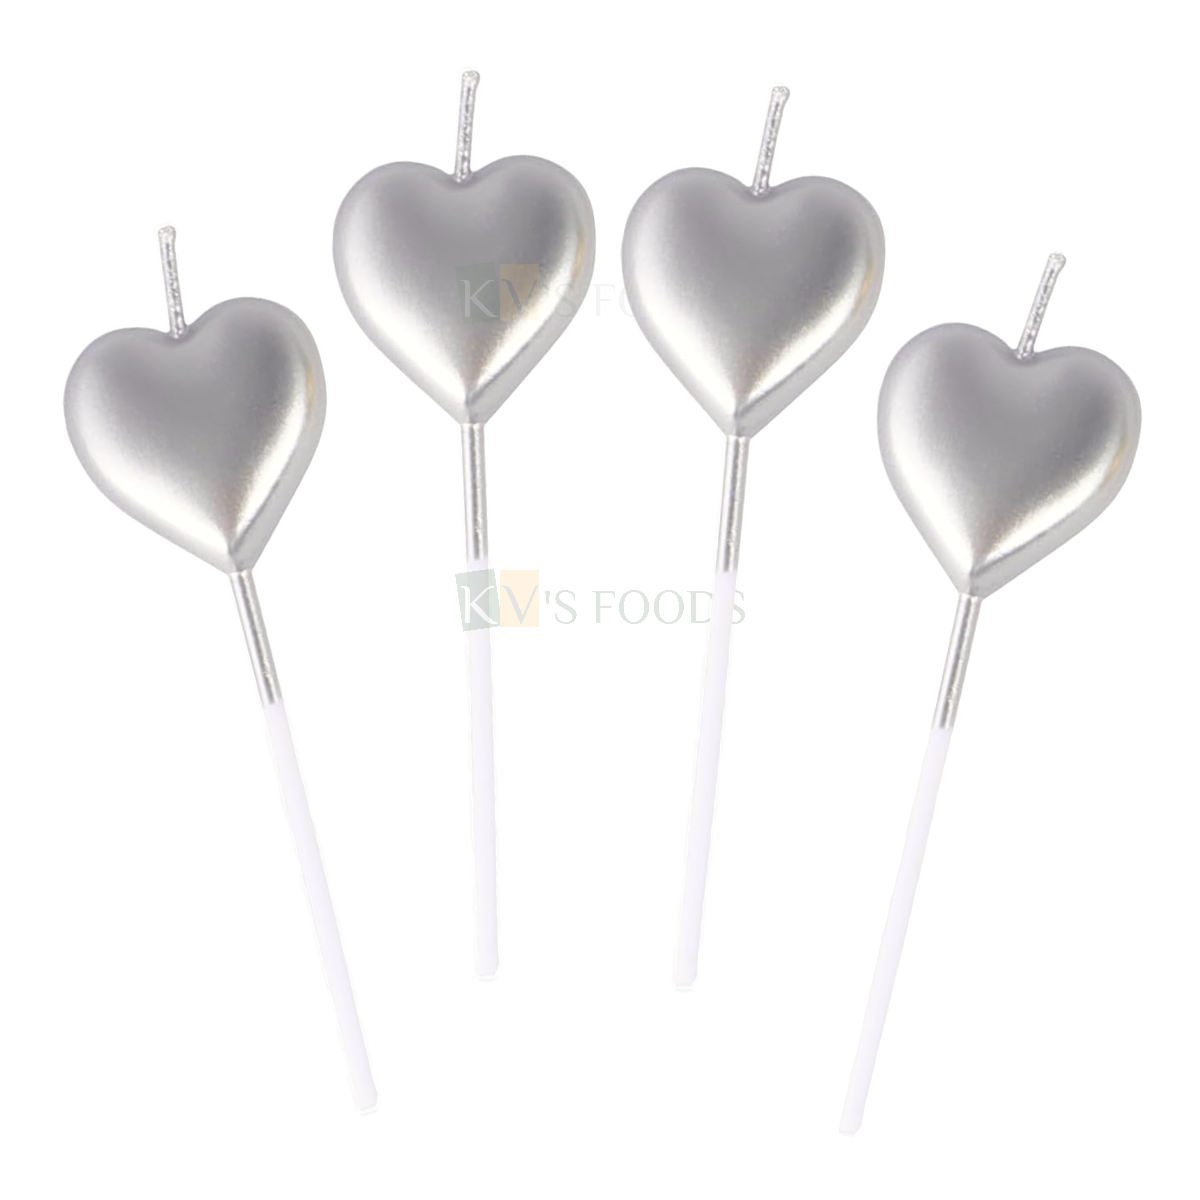 4 PCS Shiny Silver Colour Metallic Heart Shape Wax Candles Cake and Cupcake Inserts Wedding Anniversary Love Valentine's Cakes Decorations Happy Birthday Theme Silver Heart DIY Cake Decorations